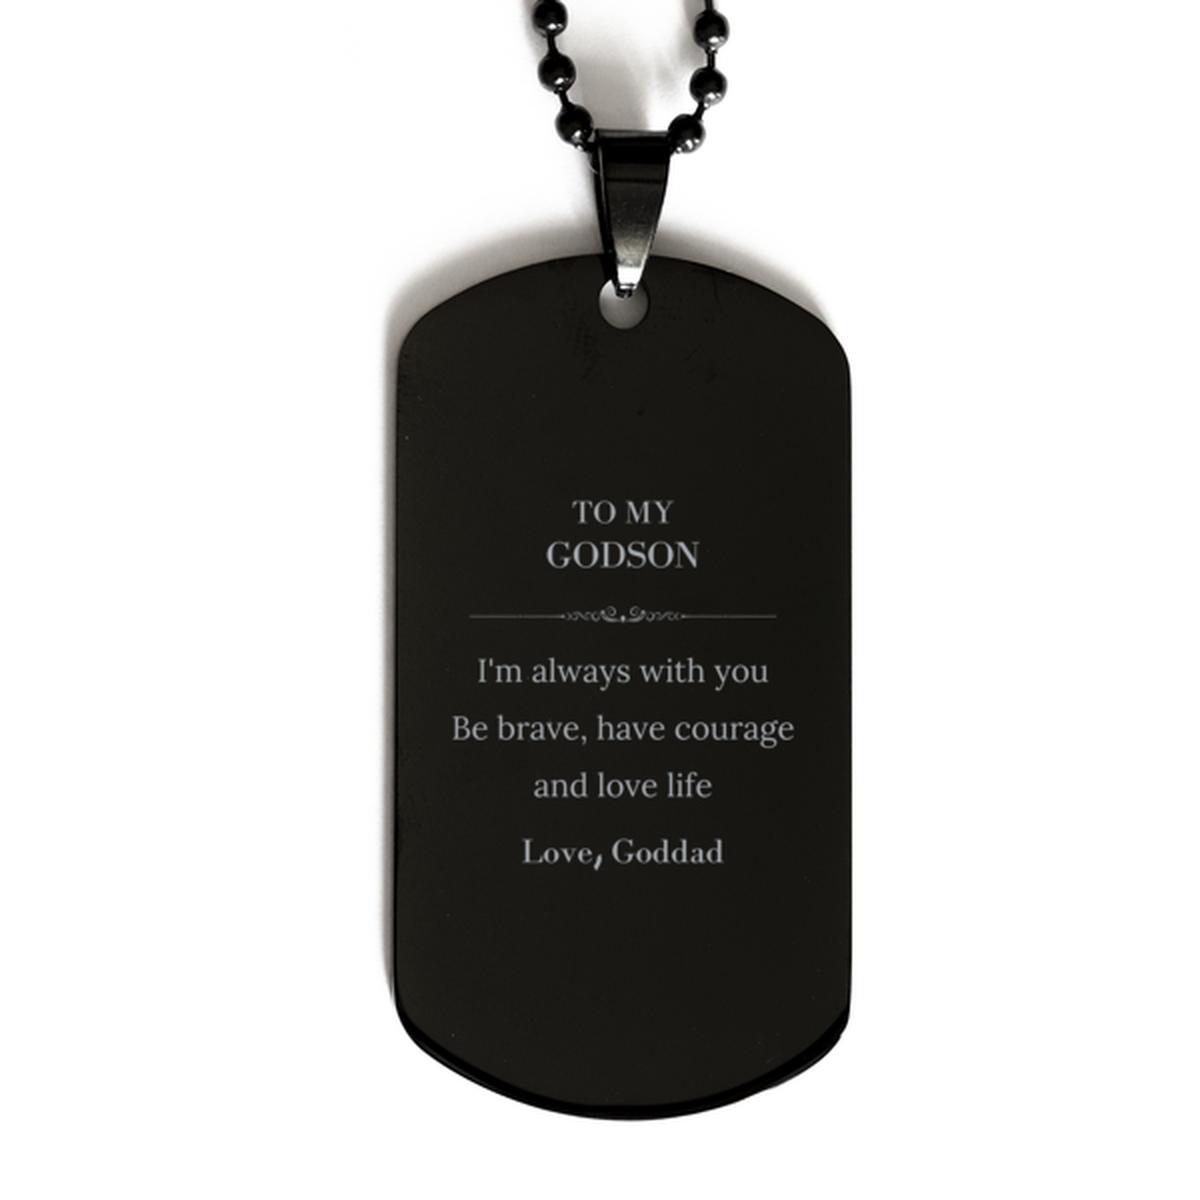 To My Godson Gifts from Goddad, Unique Black Dog Tag Inspirational Christmas Birthday Graduation Gifts for Godson I'm always with you. Be brave, have courage and love life. Love, Goddad